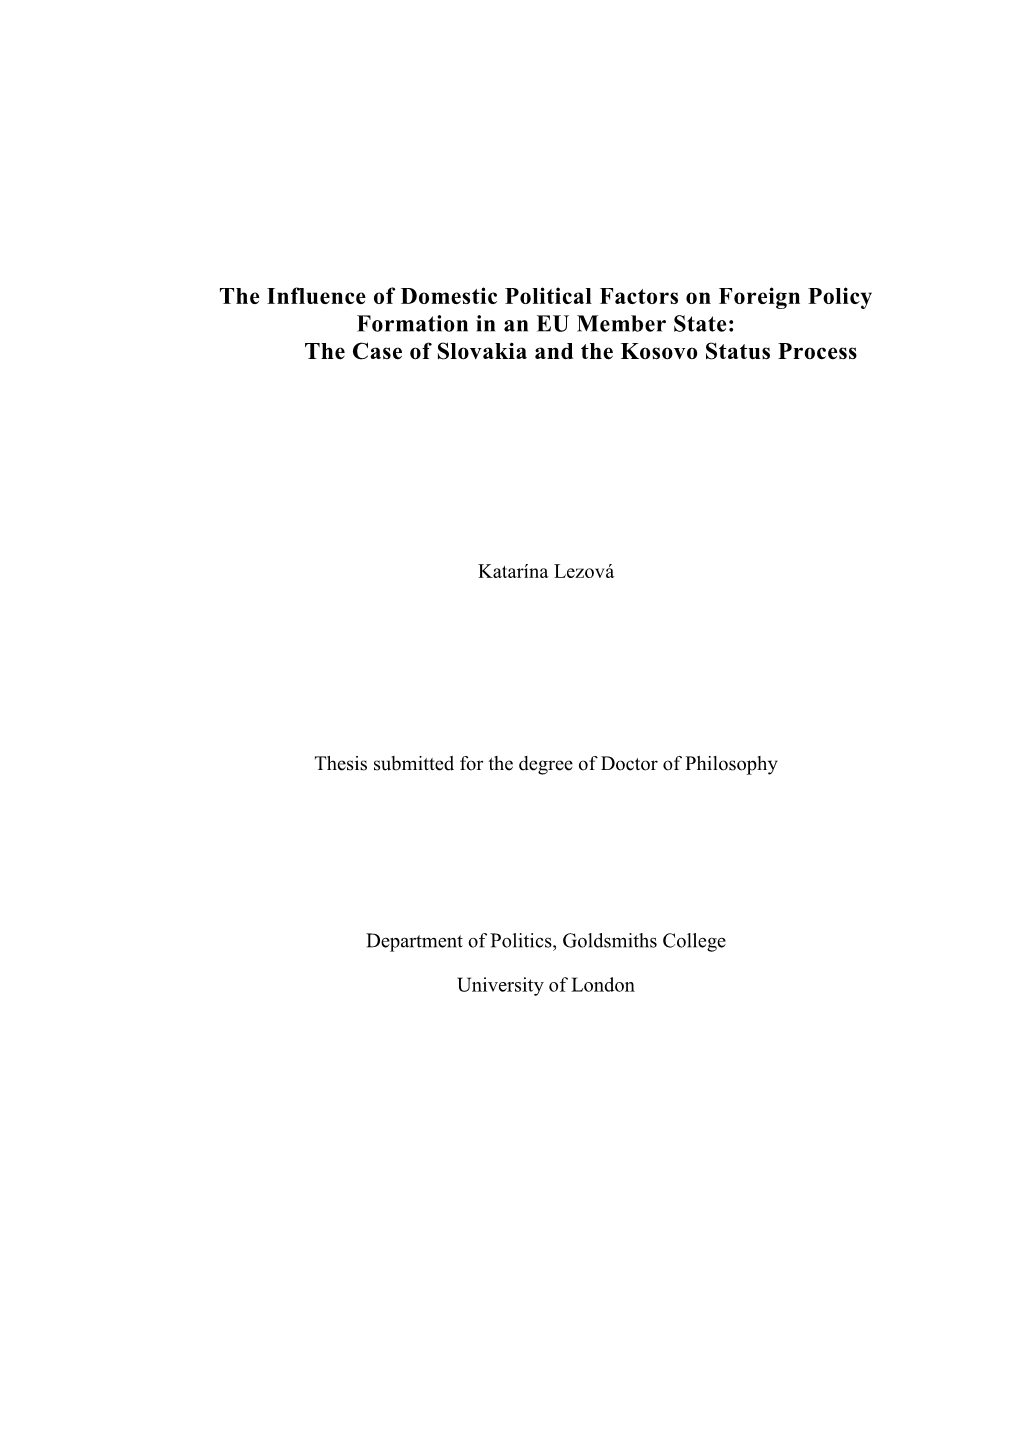 The Influence of Domestic Political Factors on Foreign Policy Formation in an EU Member State: the Case of Slovakia and the Kosovo Status Process